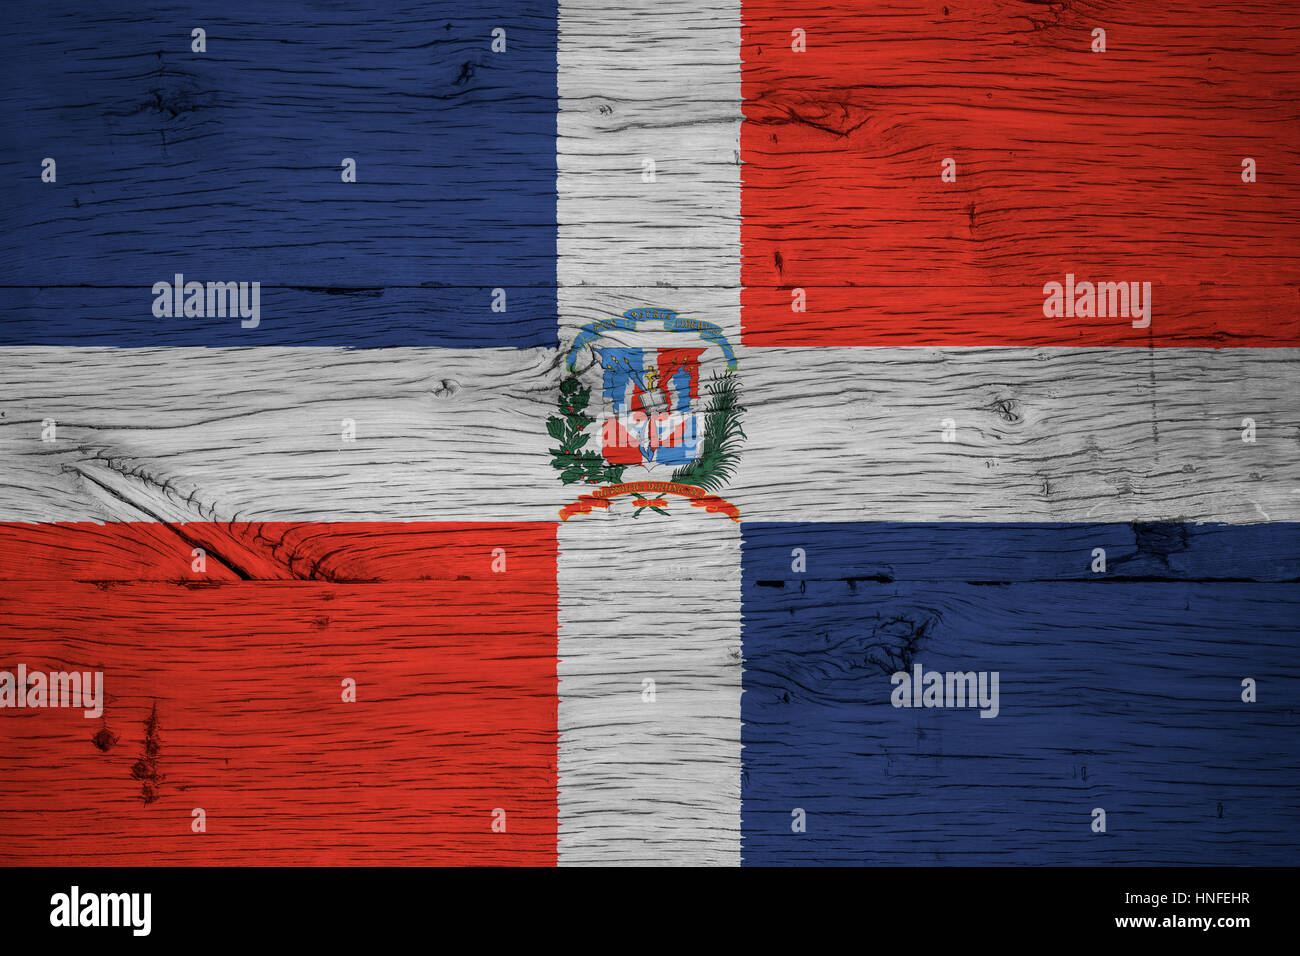 Dominican Republic national flag with coat of arms painted on old oak wood. Painting is colorful on planks of old train carriage. Stock Photo